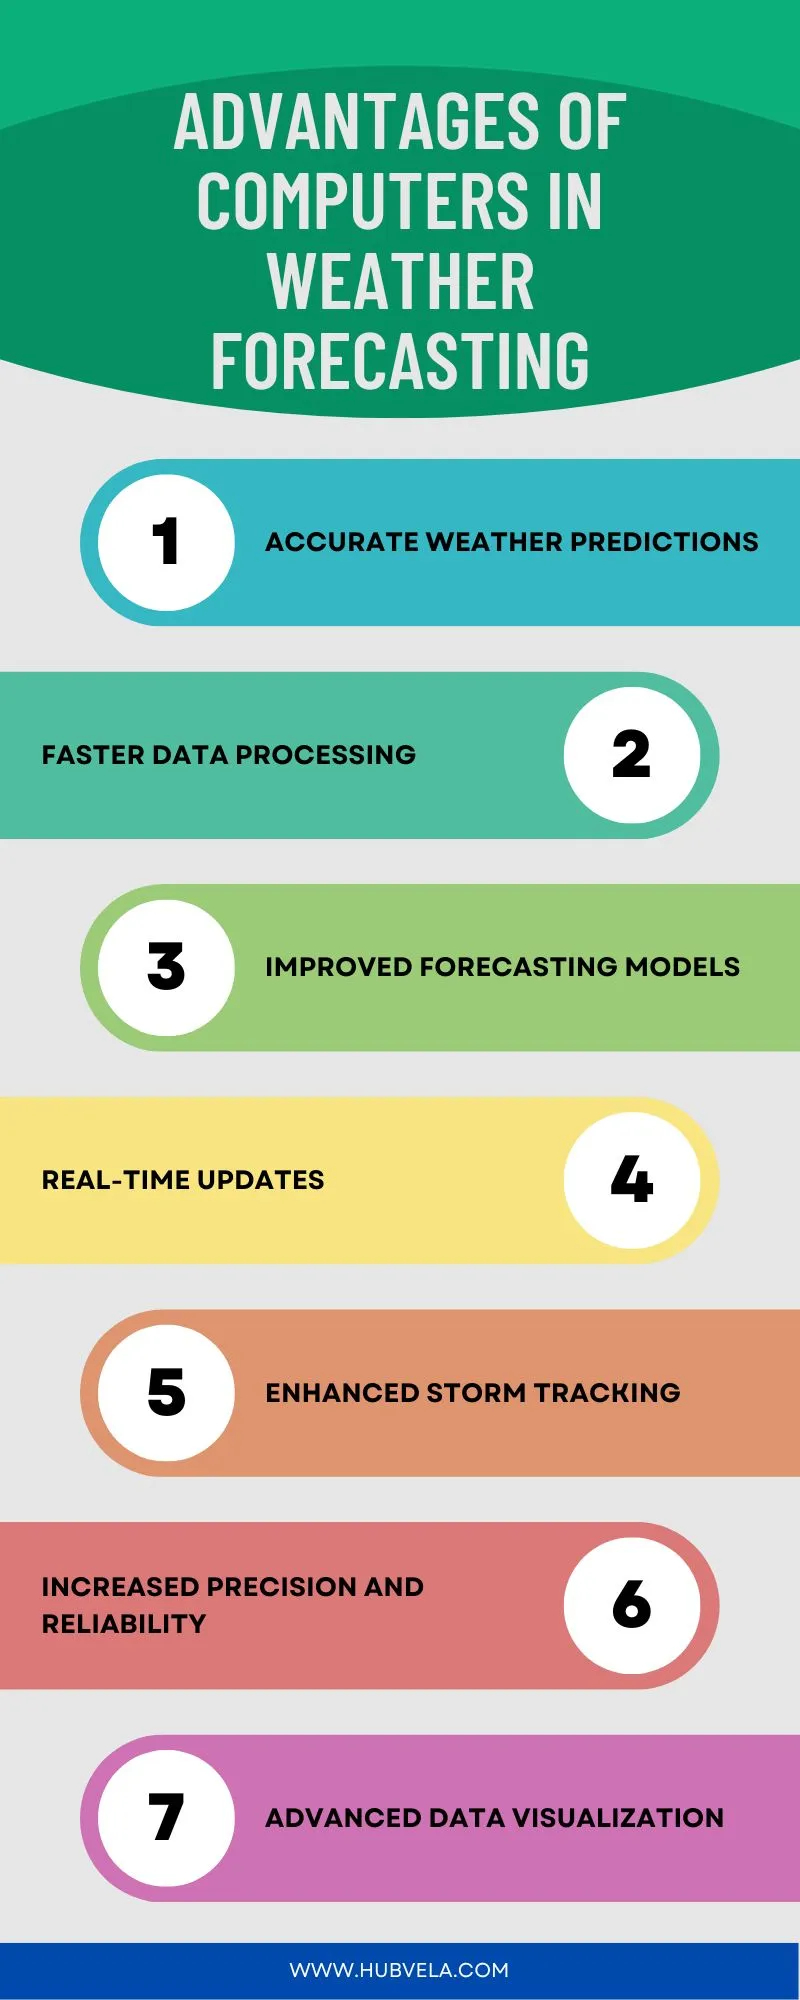 Advantages of Computers in Weather Forecasting Infographic